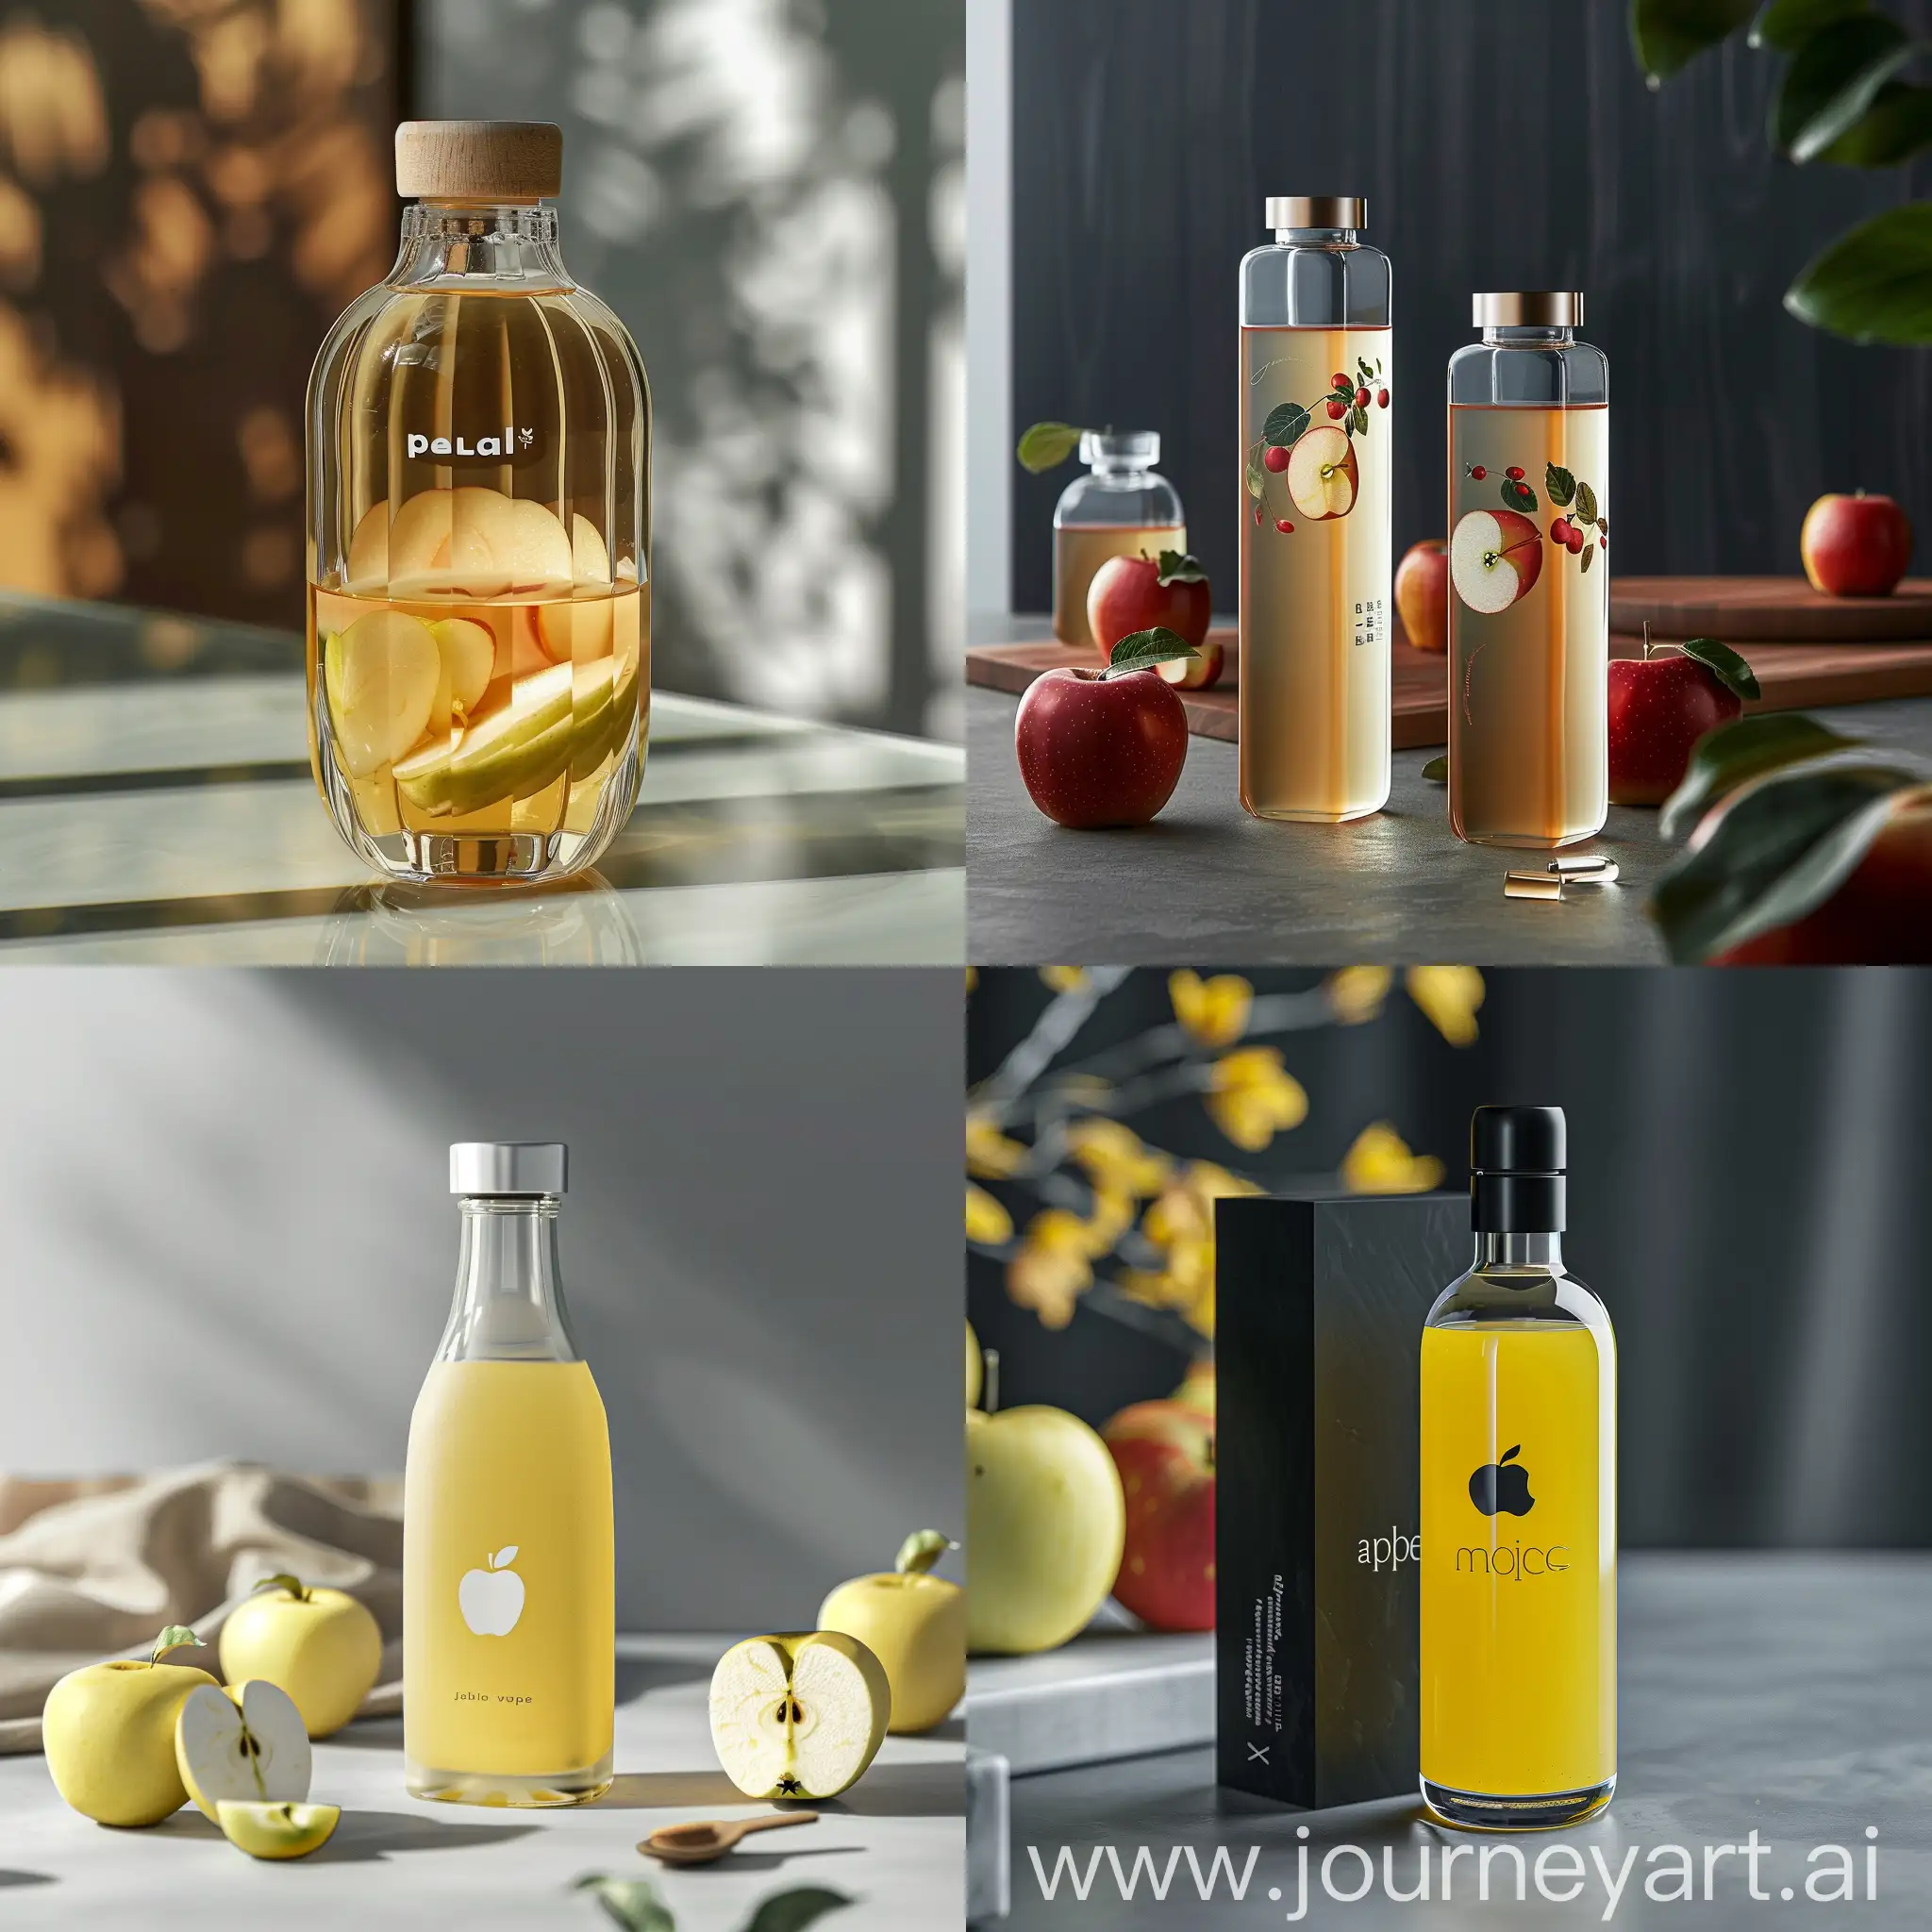 Please design a very creative, luxurious and minimal glass packaging for apple juice.
This product is going to be sold in the Persian Gulf market, so the luxury of the product is very important.
Design a high resolution magazine photo of the product designed in an environment with a waterfall behind it and apple trees and apple pieces next to the packaging.